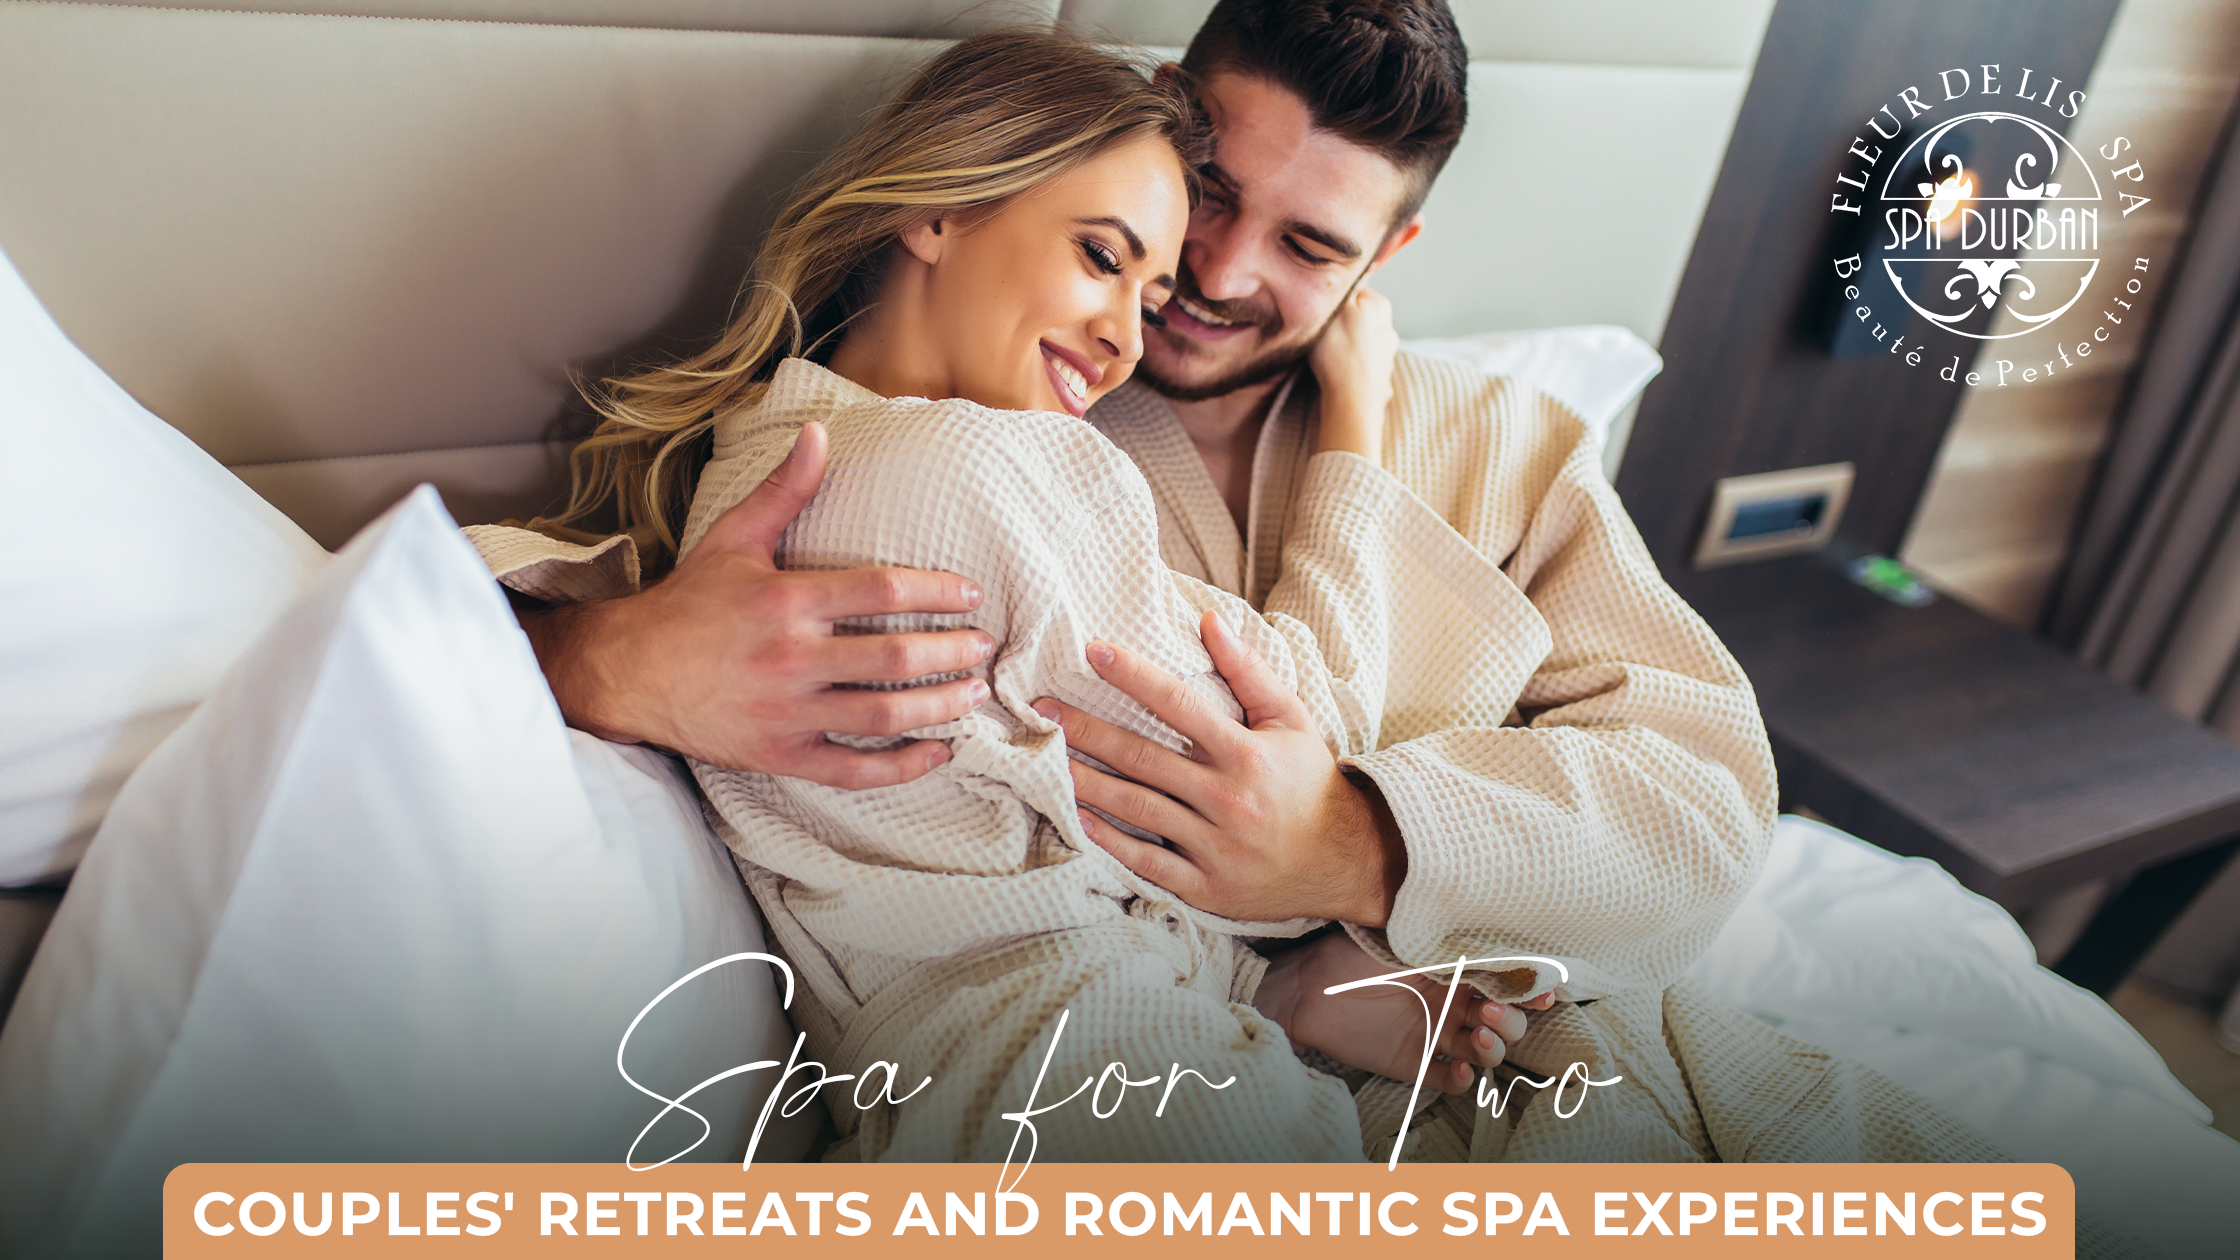 Spa for Two: Couples' Retreats and Romantic Spa Experiences